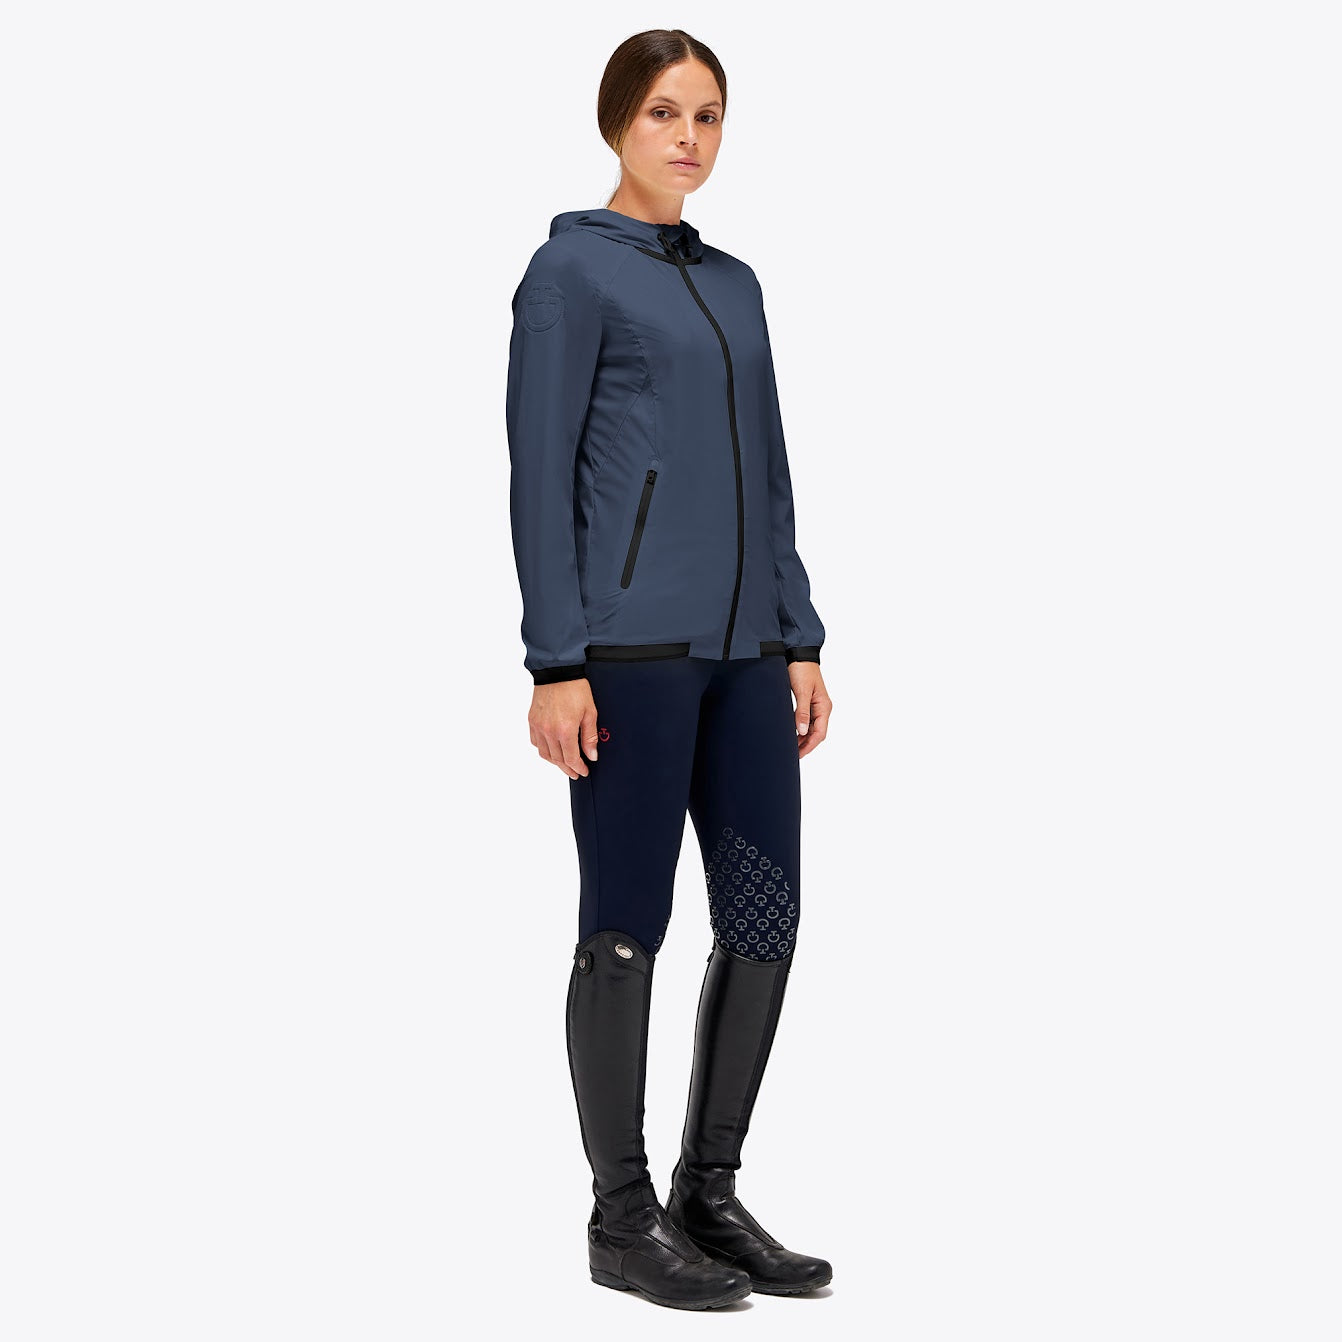 Cavalleria Toscana waterproof hooded jacket with breathable mesh insert in navy. 